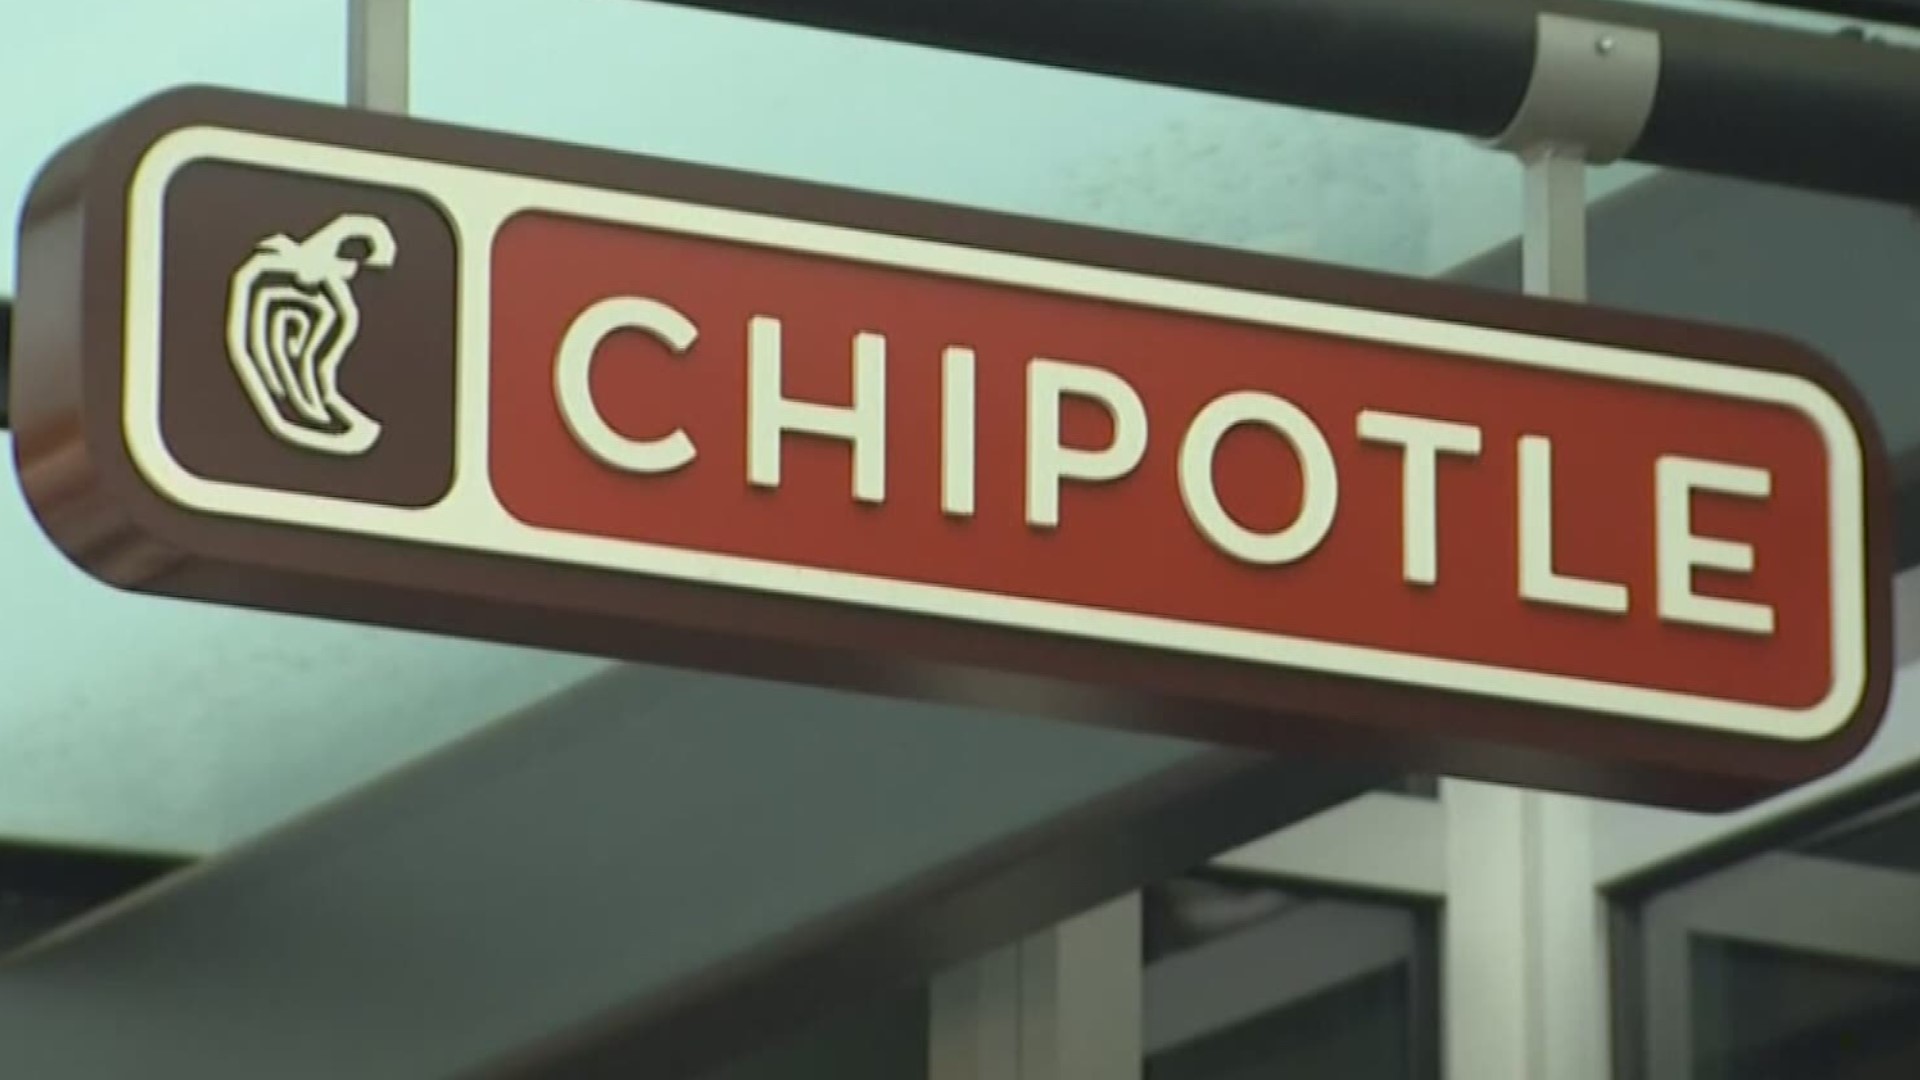 If hourly employees meet certain criteria and their stores meet sales goals, Chipotle said they will offer those workers a month's salary as a bonus. It's part of an incentive program with the intention to lure new employees.